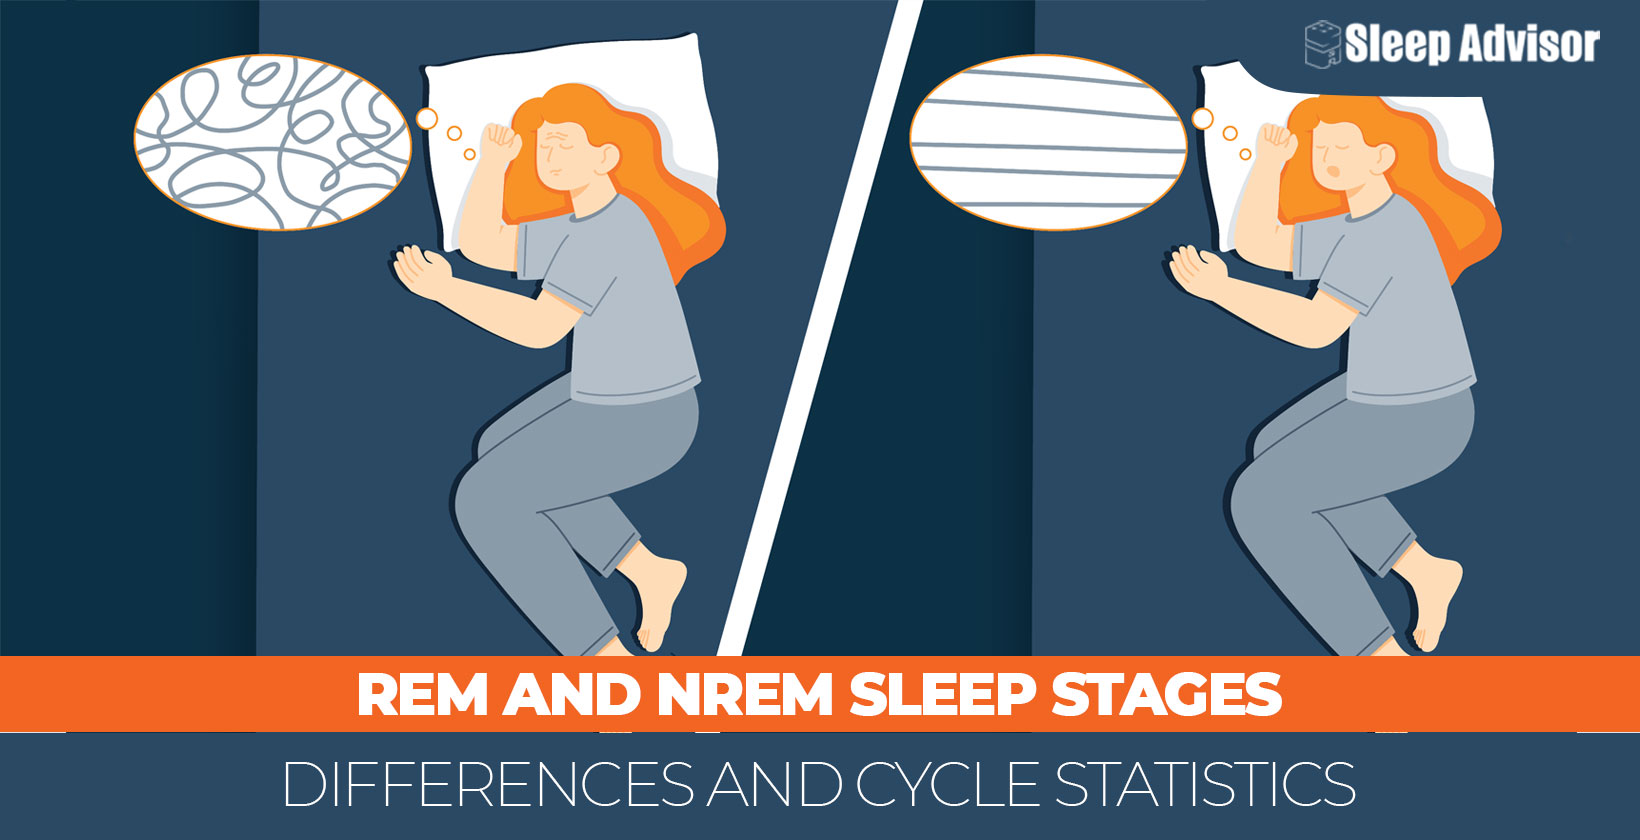 REM and NREM Sleep Stages: Differences and Cycle Statistics